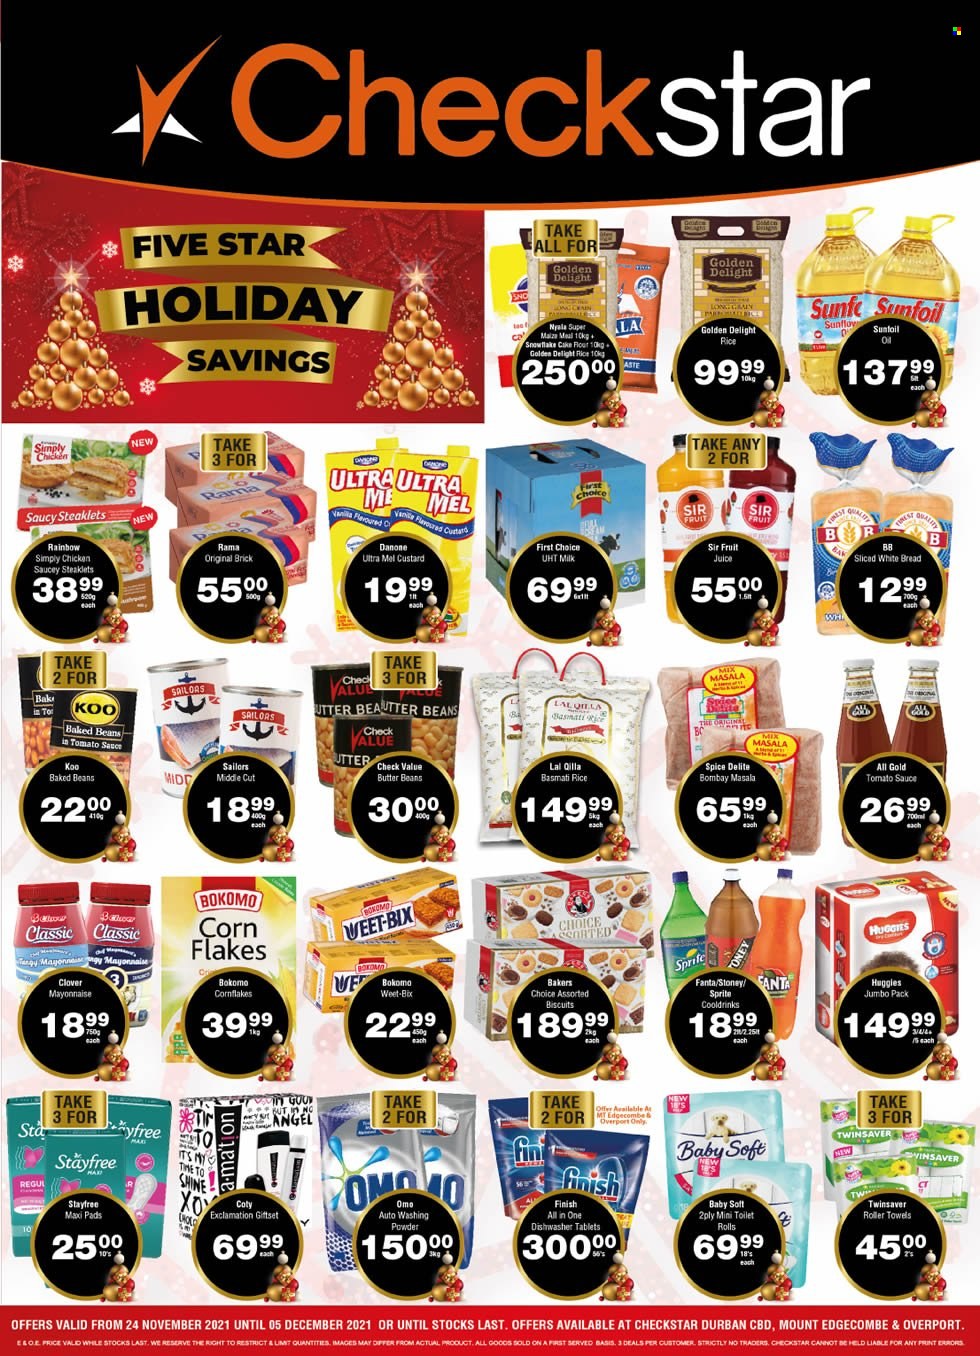 Checkstar catalogue  - 24/11/2021 - 05/12/2021 - Sales products - bread, white bread, beans, sauce, custard, Danone, Clover, milk, butter, Rama, mayonnaise, biscuit, tomato sauce, baked beans, Koo, corn flakes, Weet-Bix, basmati rice, rice, spice, Sprite, Fanta, juice, Baby Soft, kitchen towels, paper towels, Omo, dishwasher cleaner, dishwasher tablets, Stayfree, sanitary pads, BIC. Page 1.